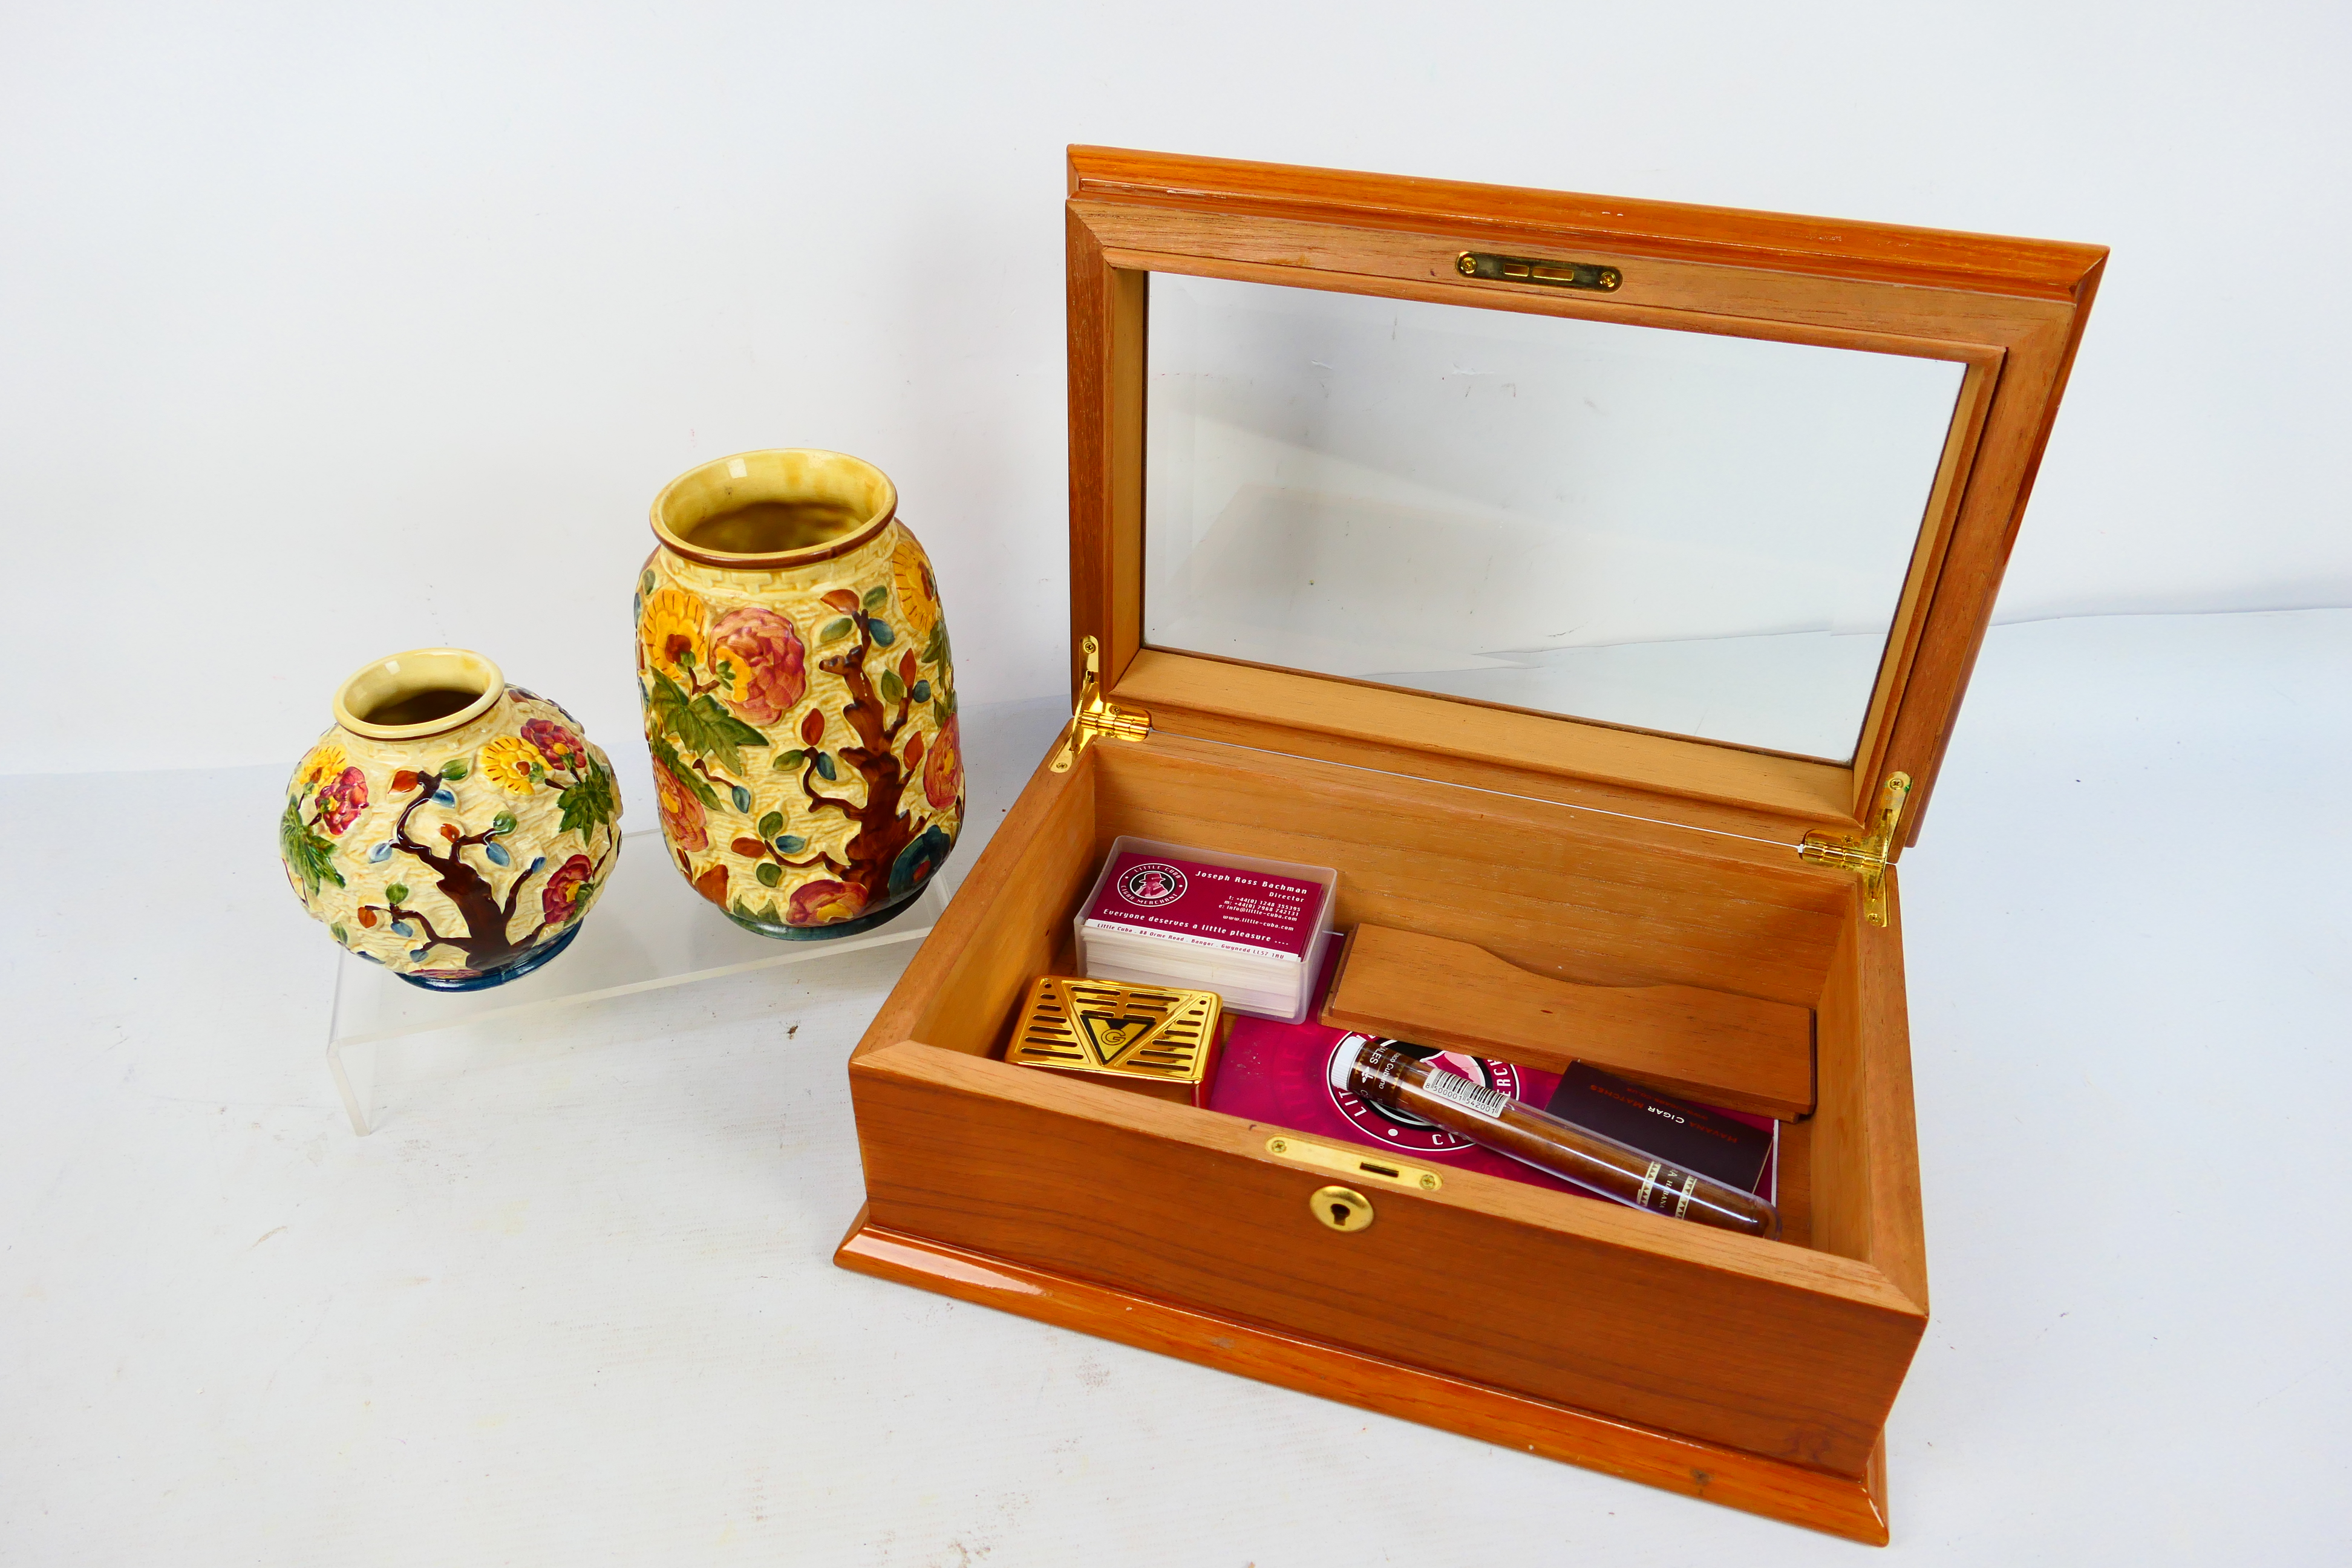 Lot to include a glass top cigar humidor, 14 cm x 36 cm x 24 cm and two H Wood Indian Tree vases.